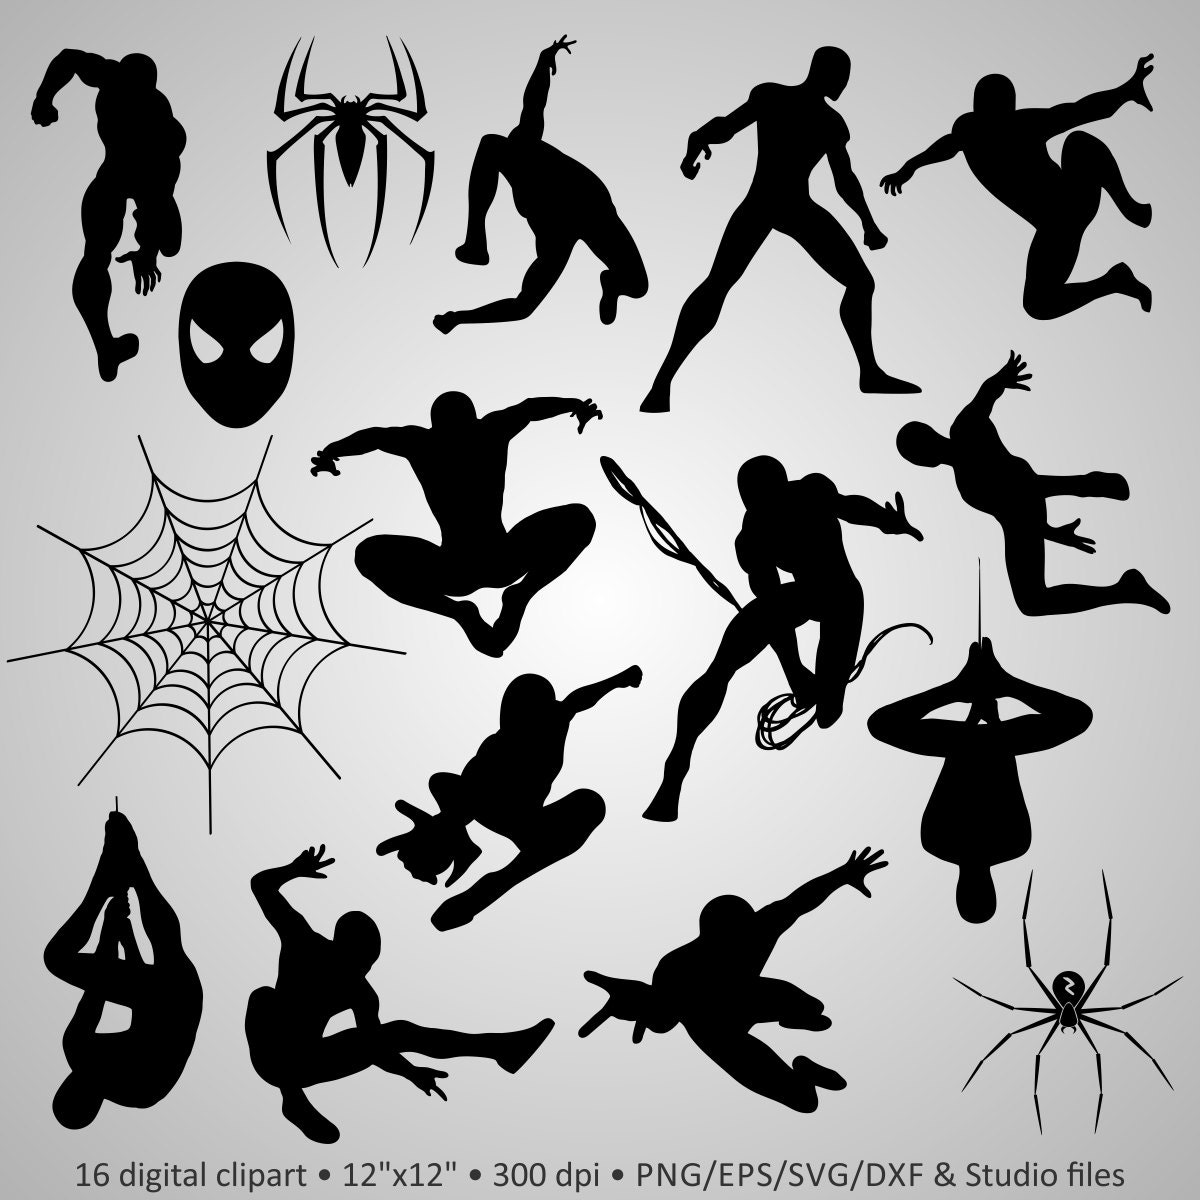 1000+ images about * Cartoon Silhouettes, Vectors, Clipart